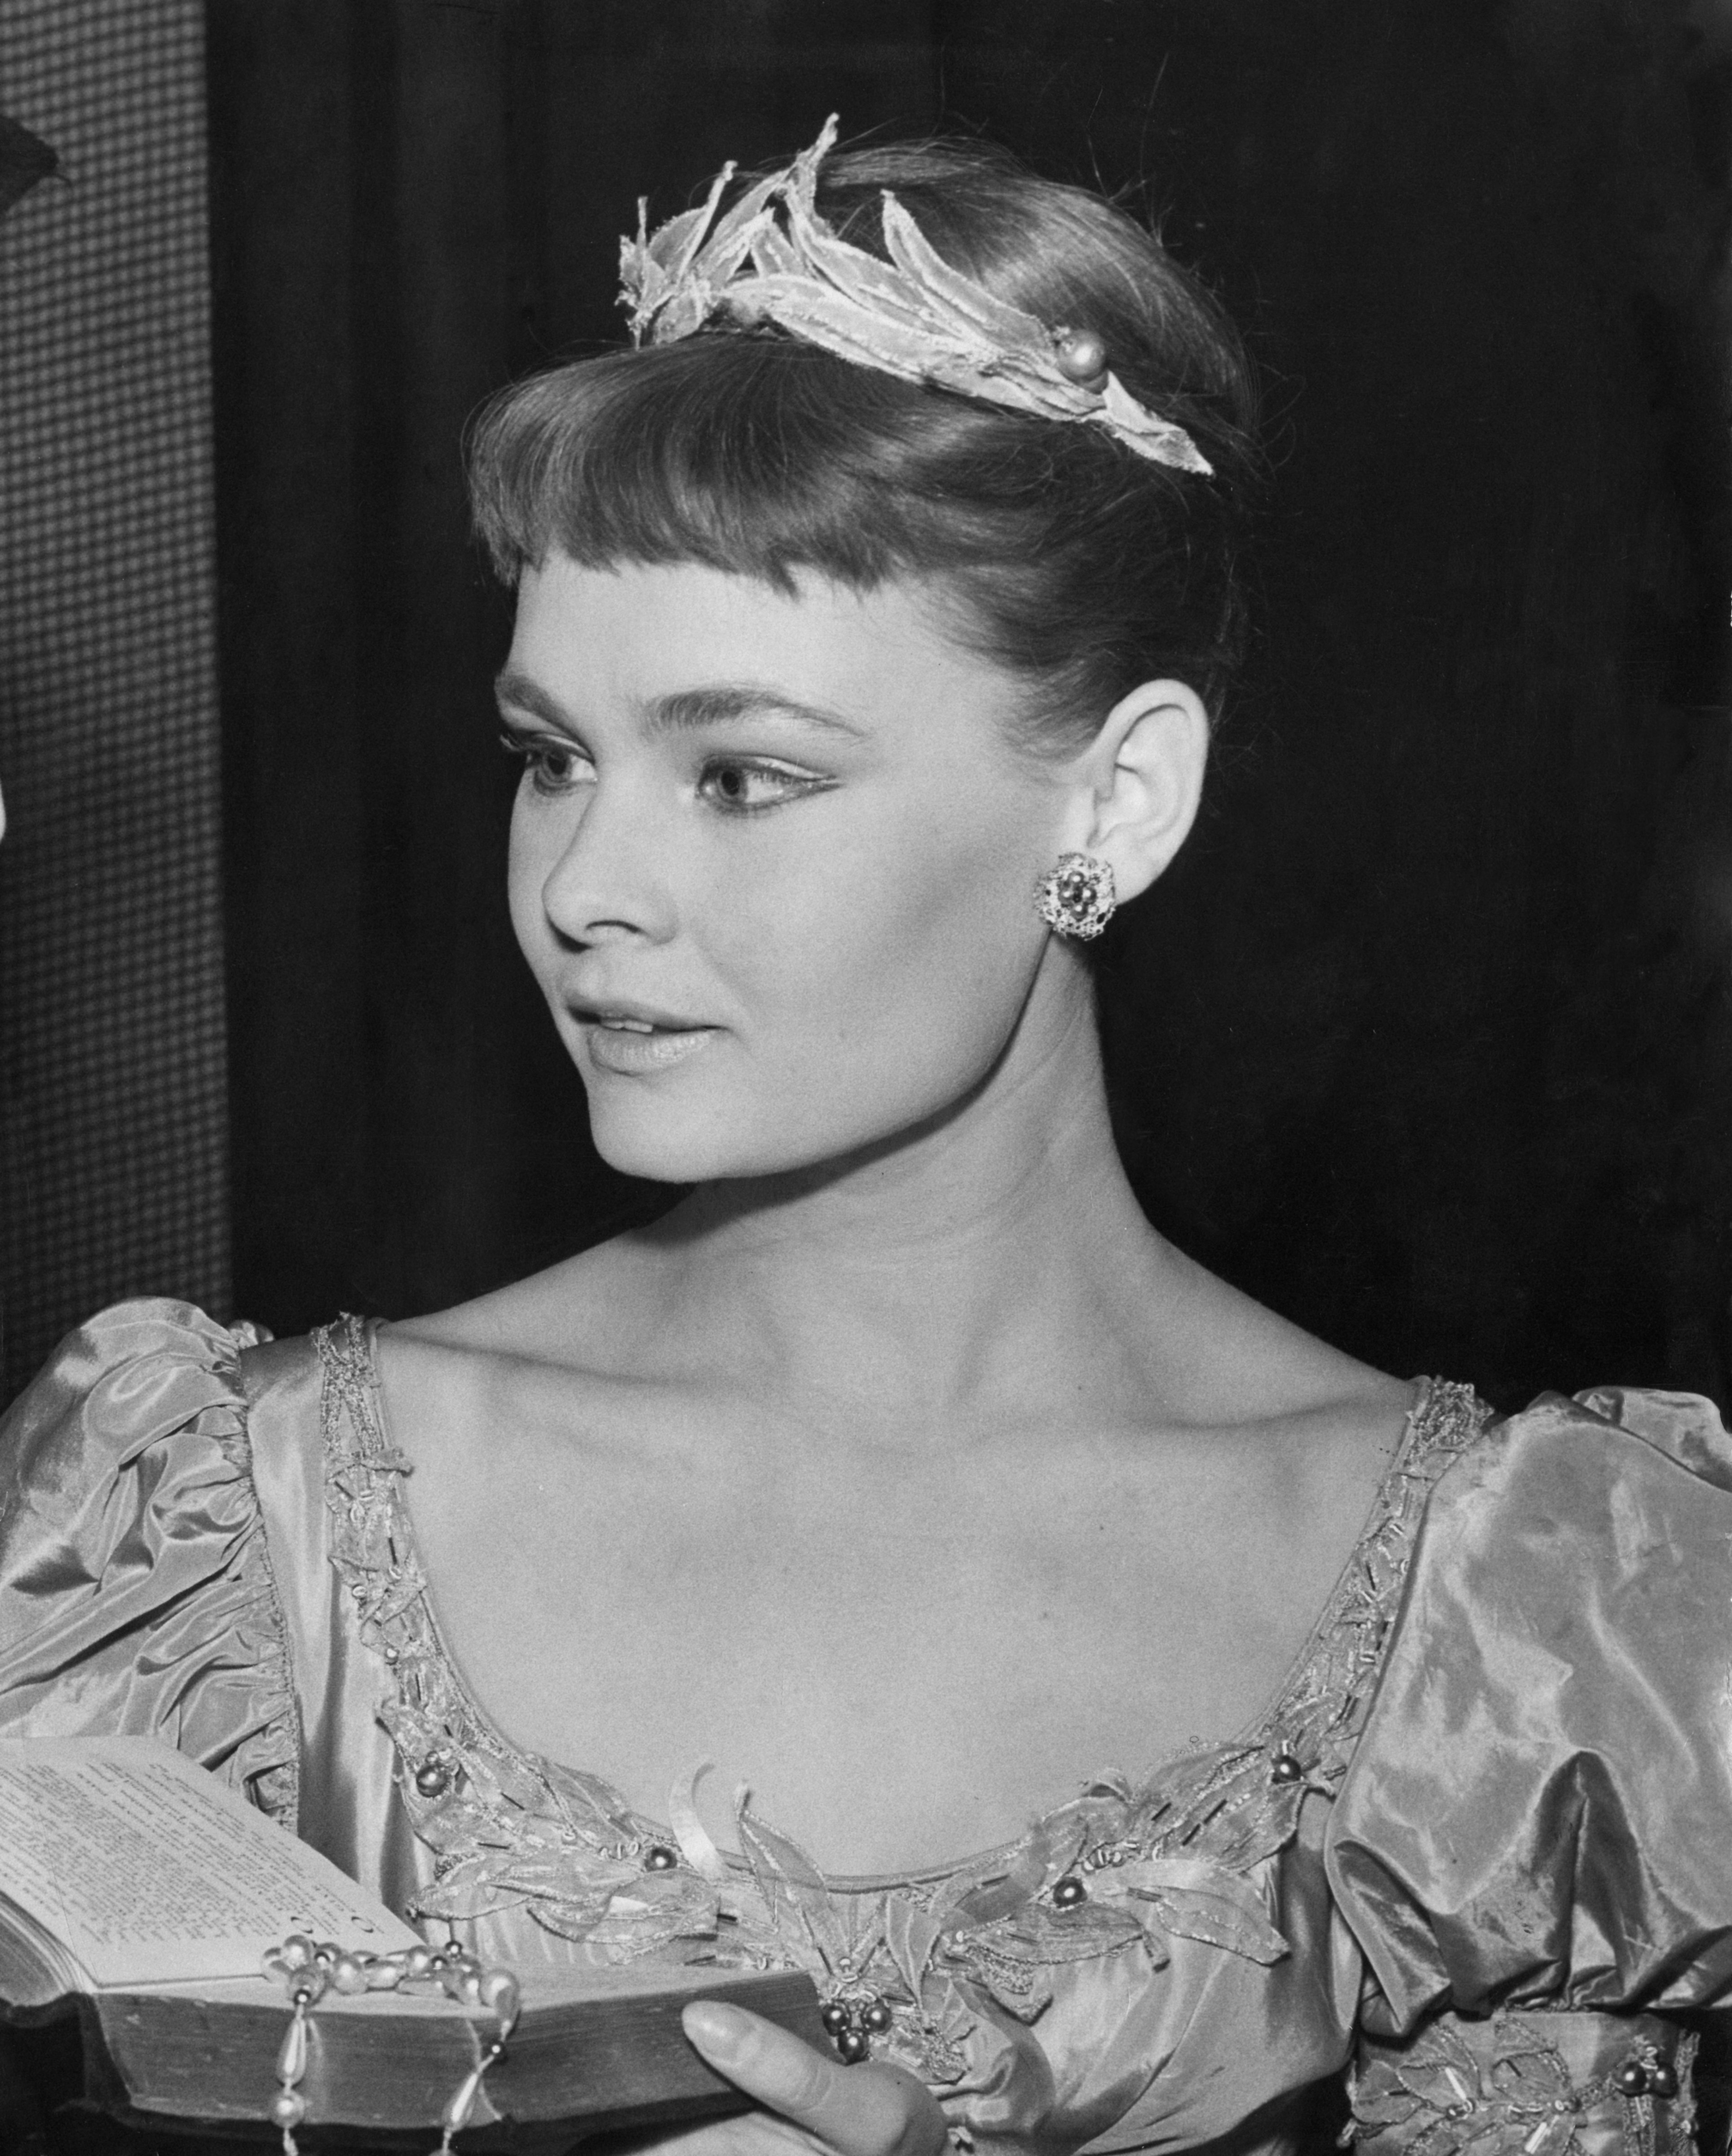 Judi Dench as Ophelia at Michael Benthall's production of Shakespeare's "Hamlet" on September 15, 1957 | Source: Getty Images